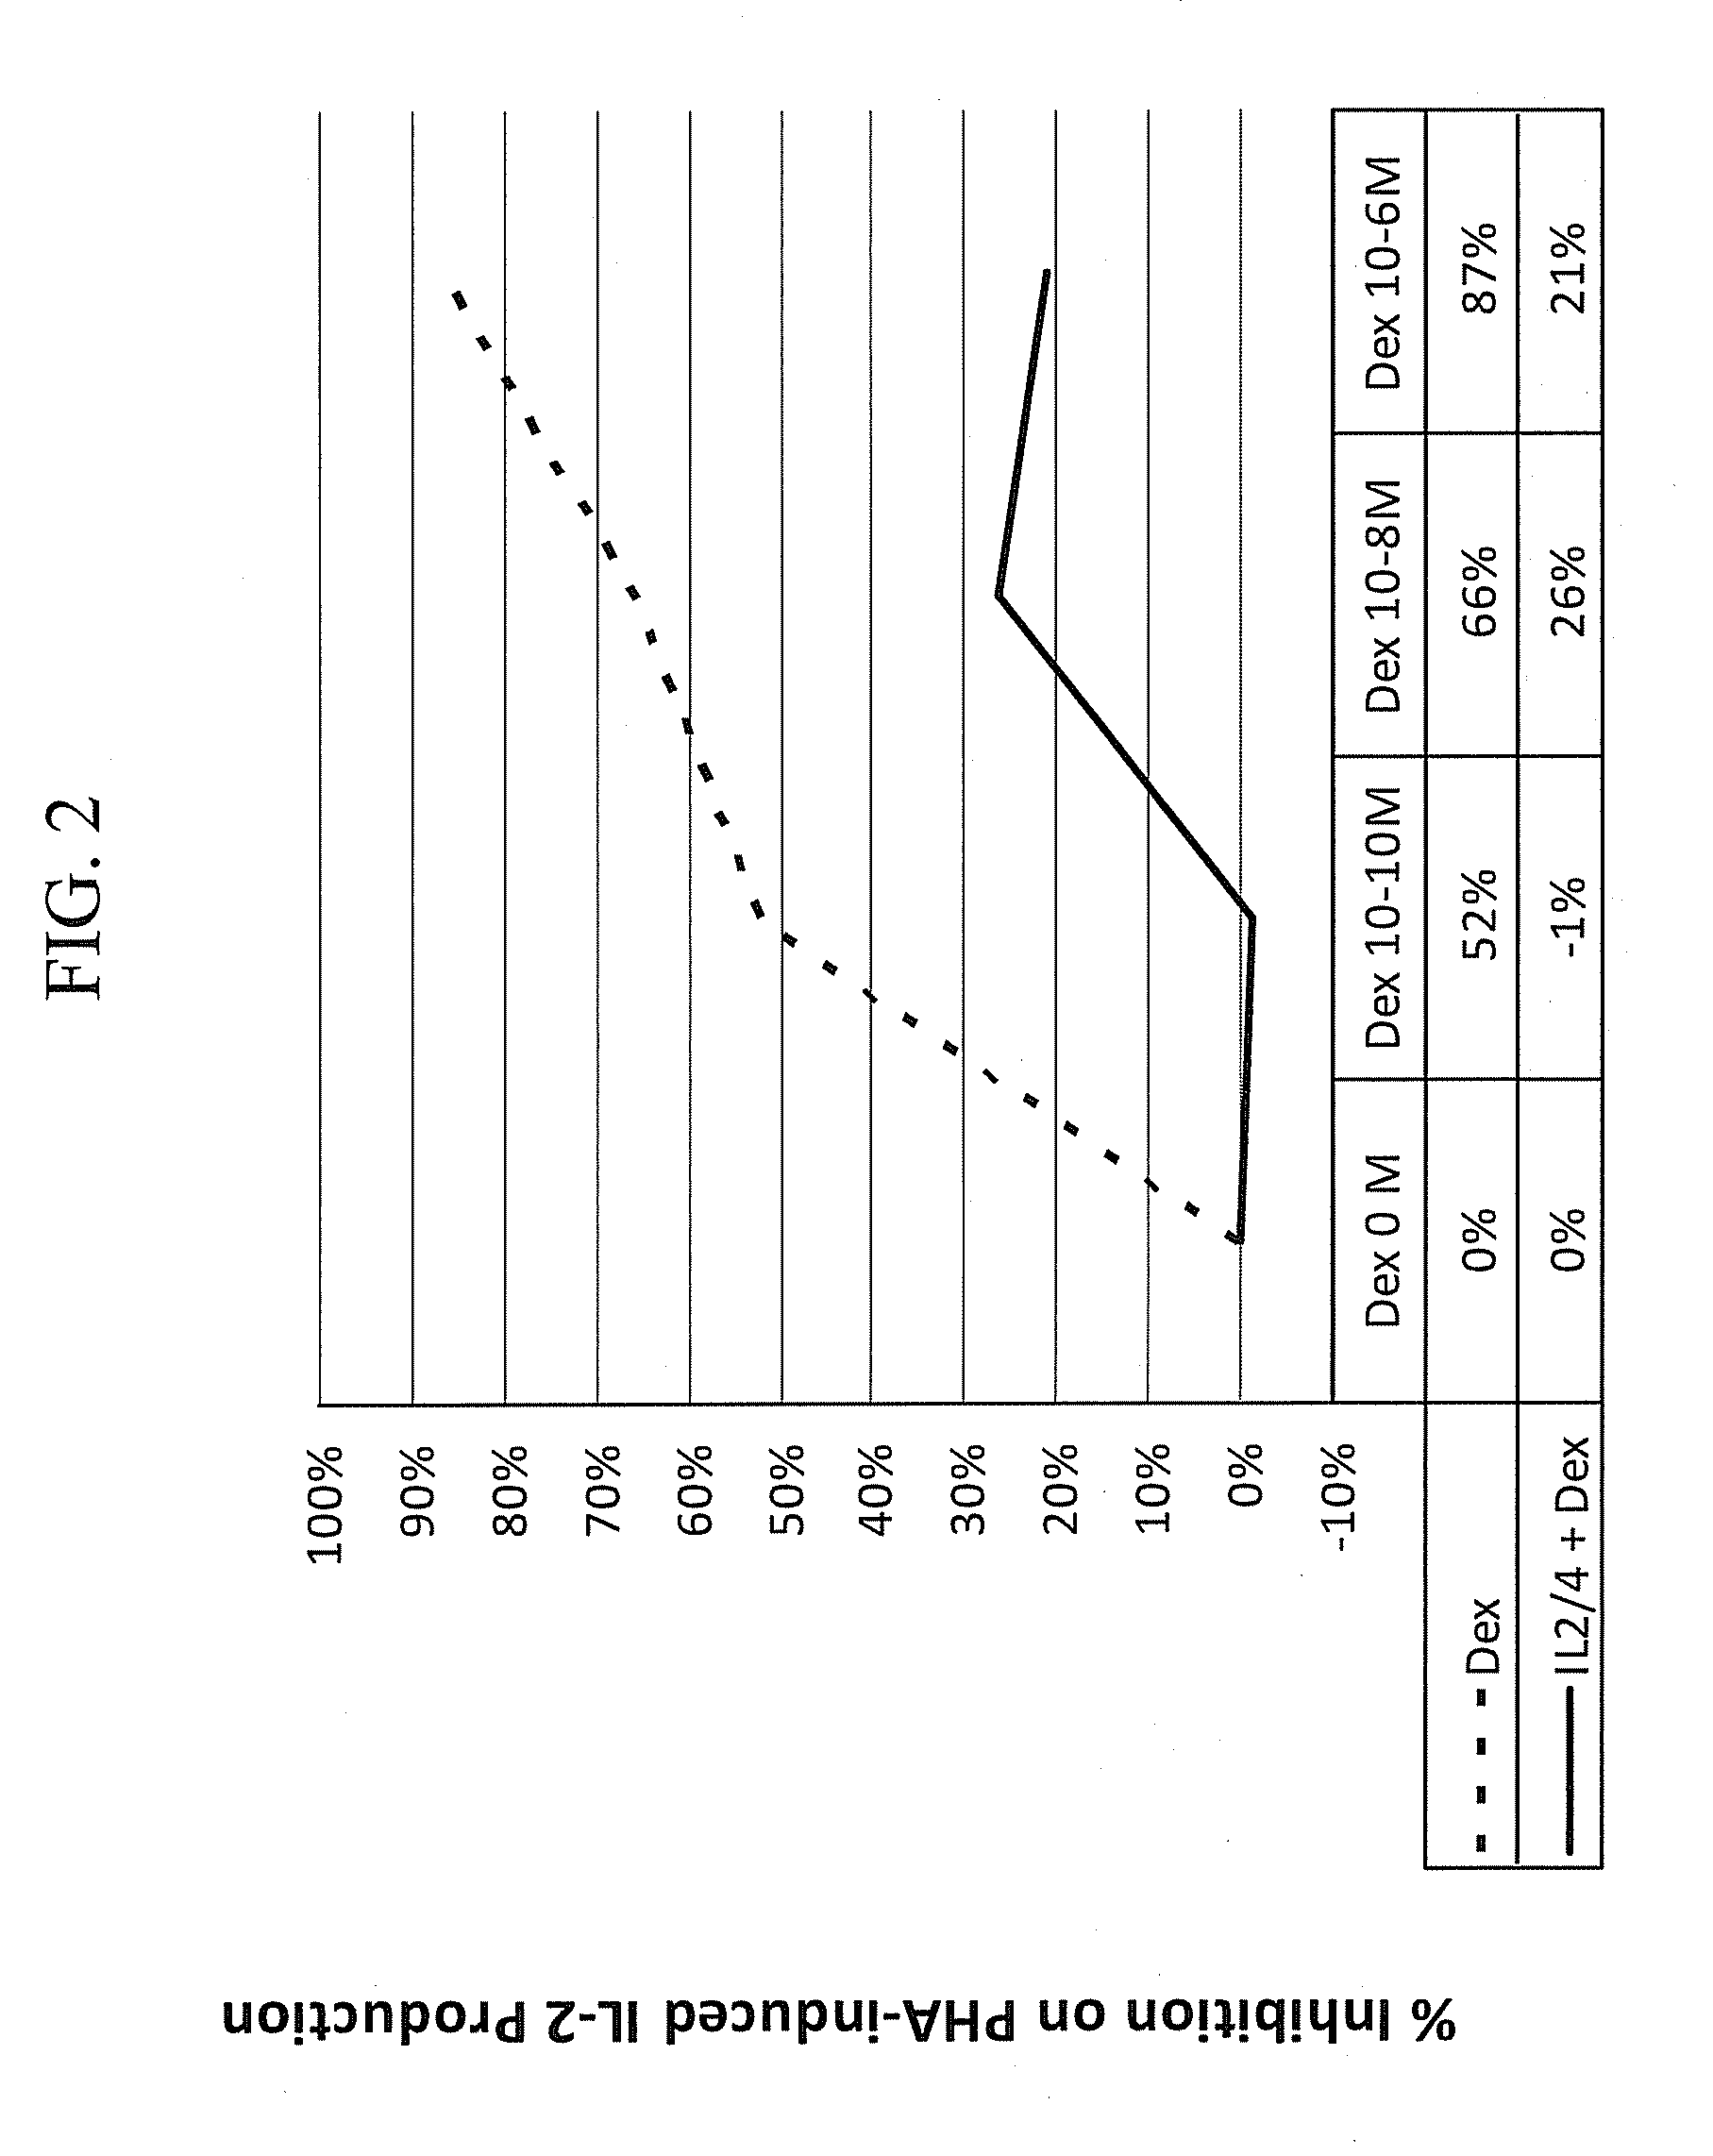 Methods for the use of progestogen as a glucocorticoid sensitizer